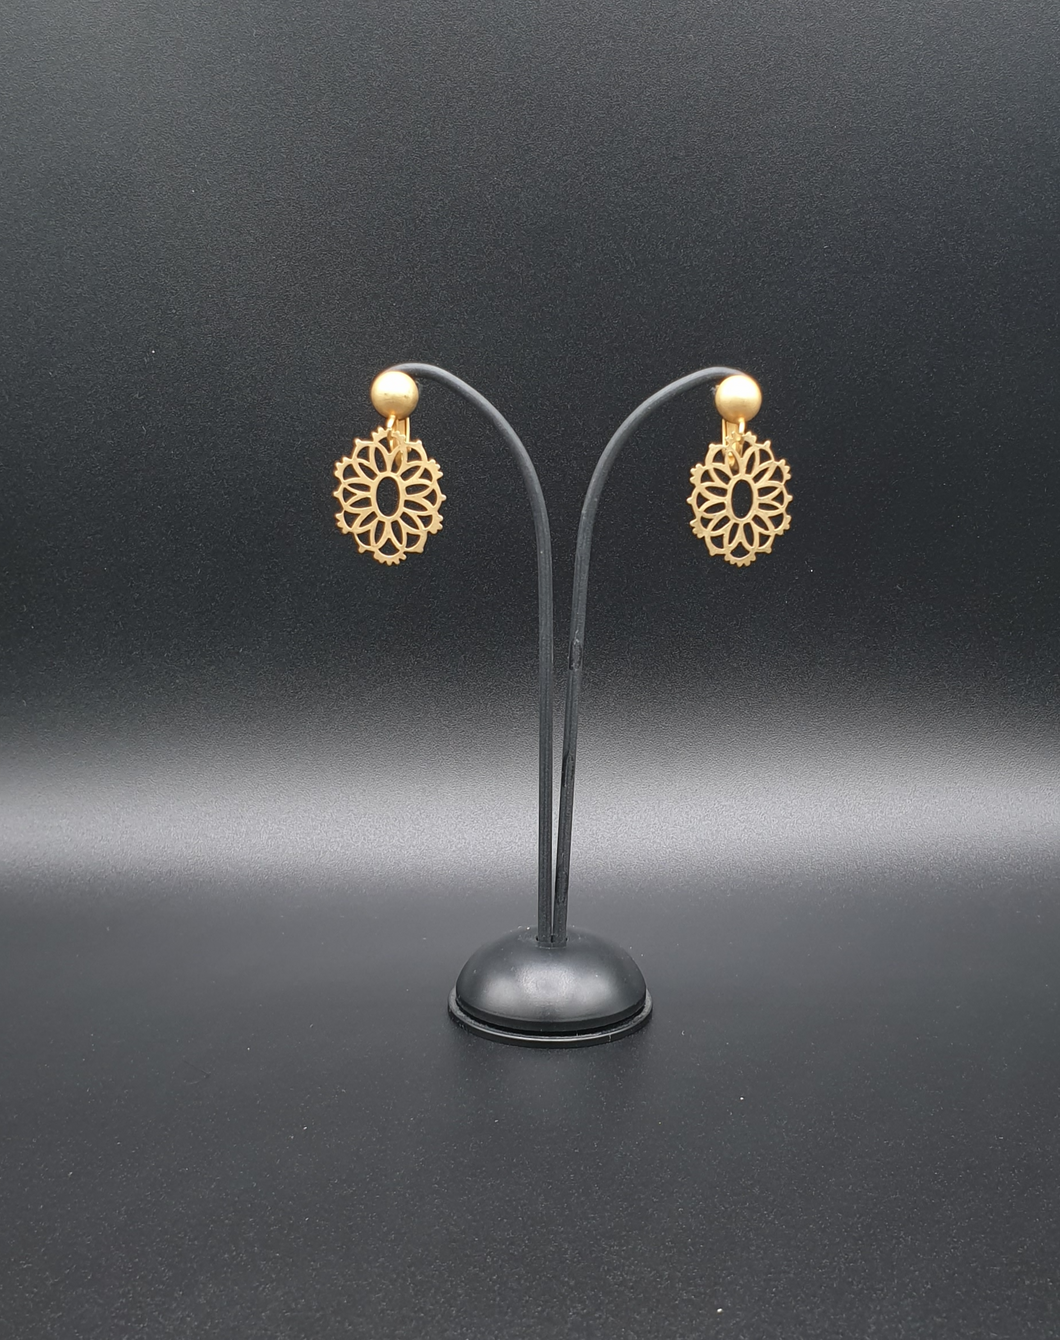 golden metal clip-on earrings with decorative element